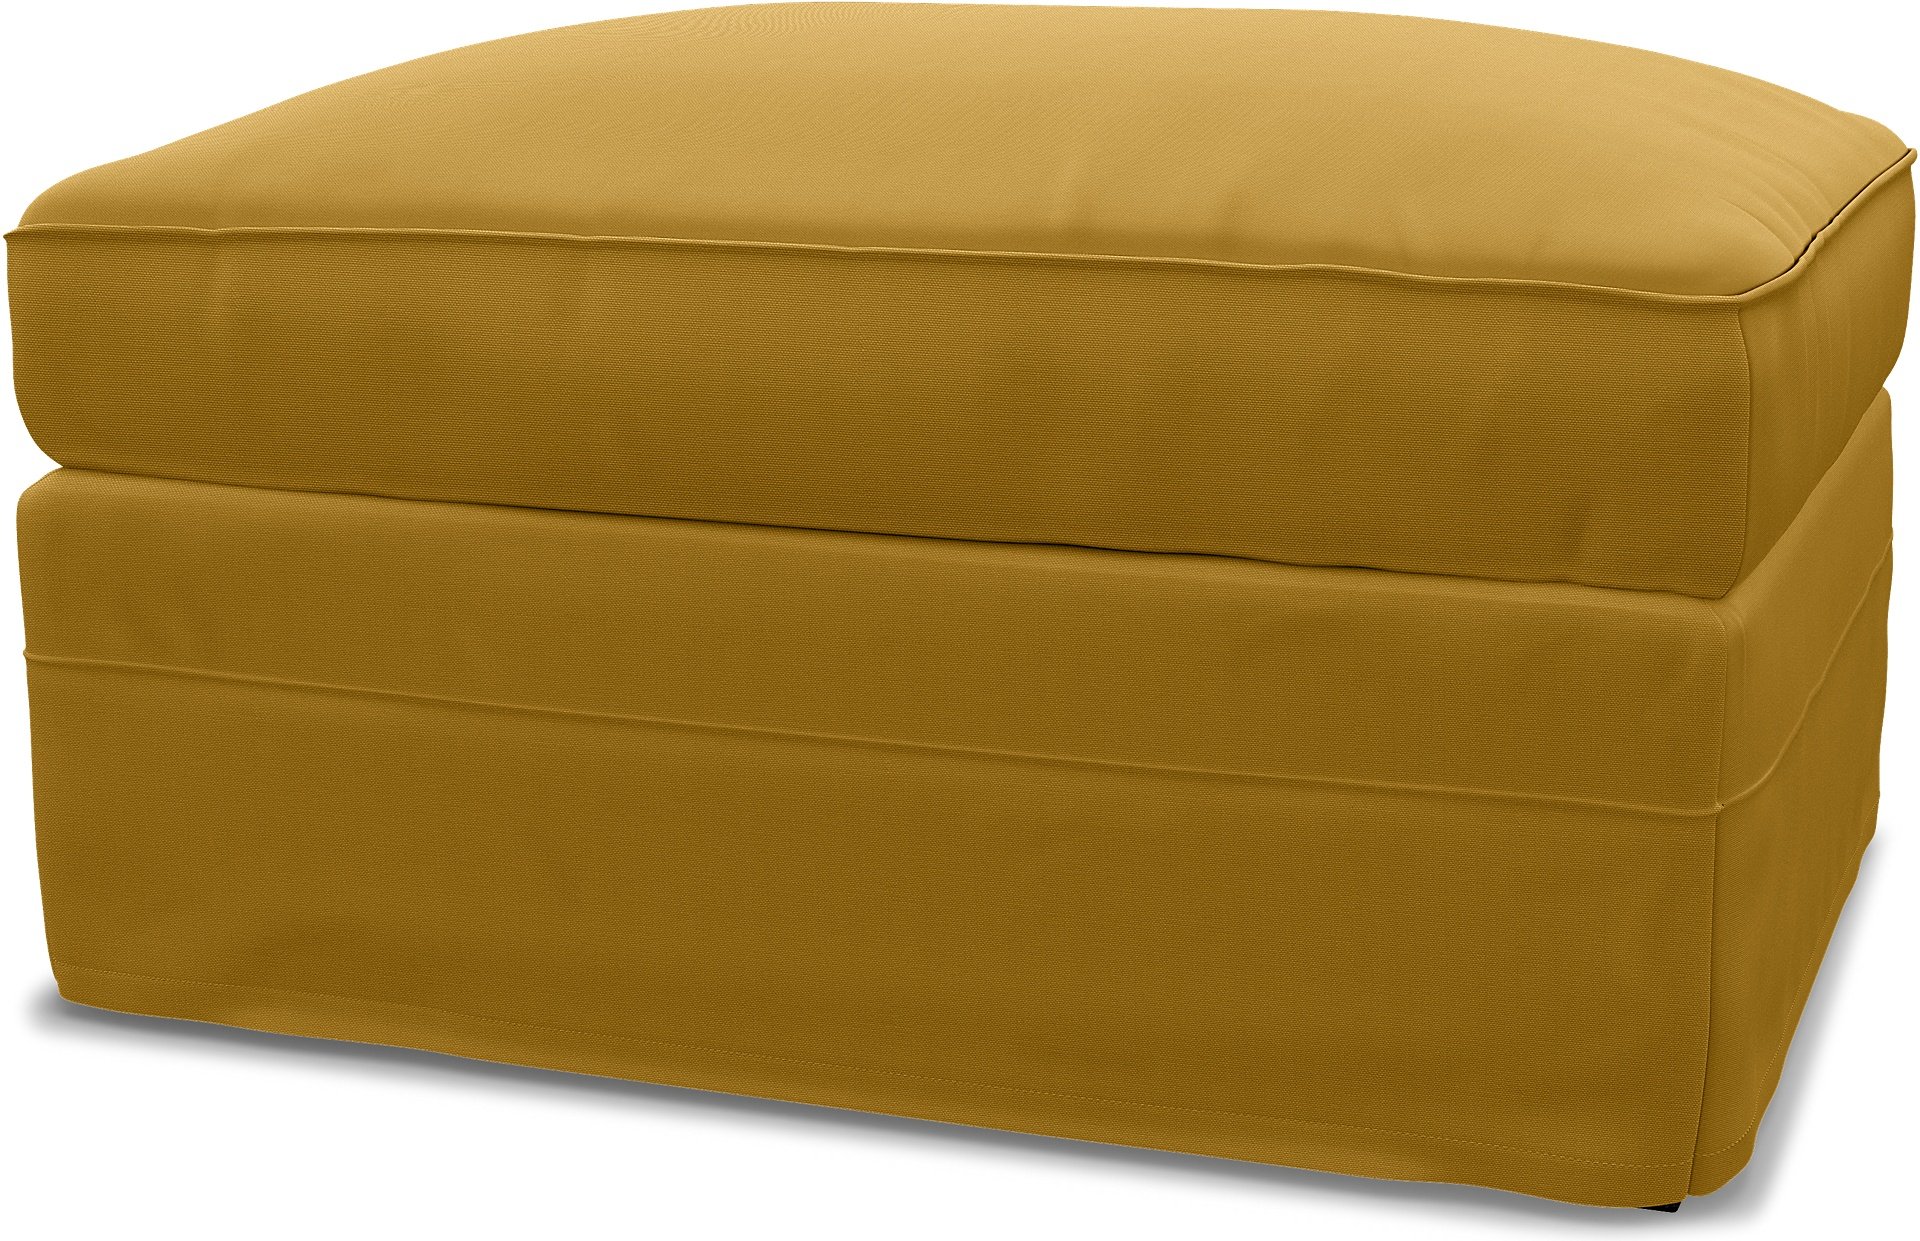 IKEA - Gronlid Footstool with Storage Cover, Honey Mustard, Cotton - Bemz